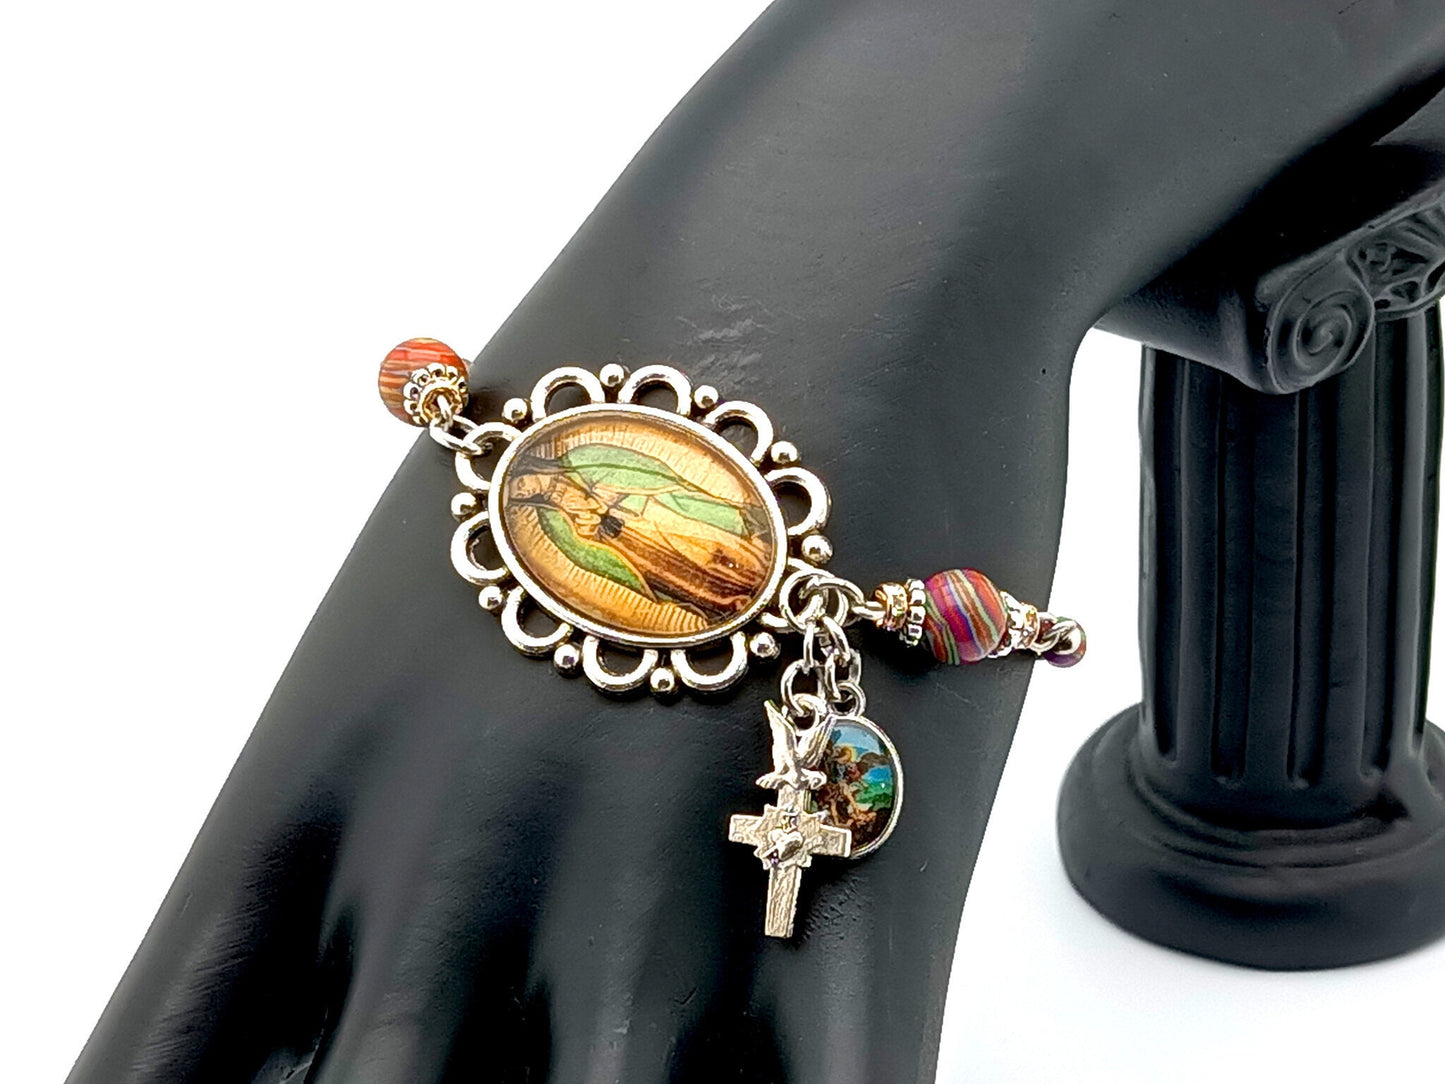 Our Lady of Guadalupe unqie rosary beads adjustable stainless steel bracelet with malachite gemstones and Holy Spirit cross and Saint Michael medal.